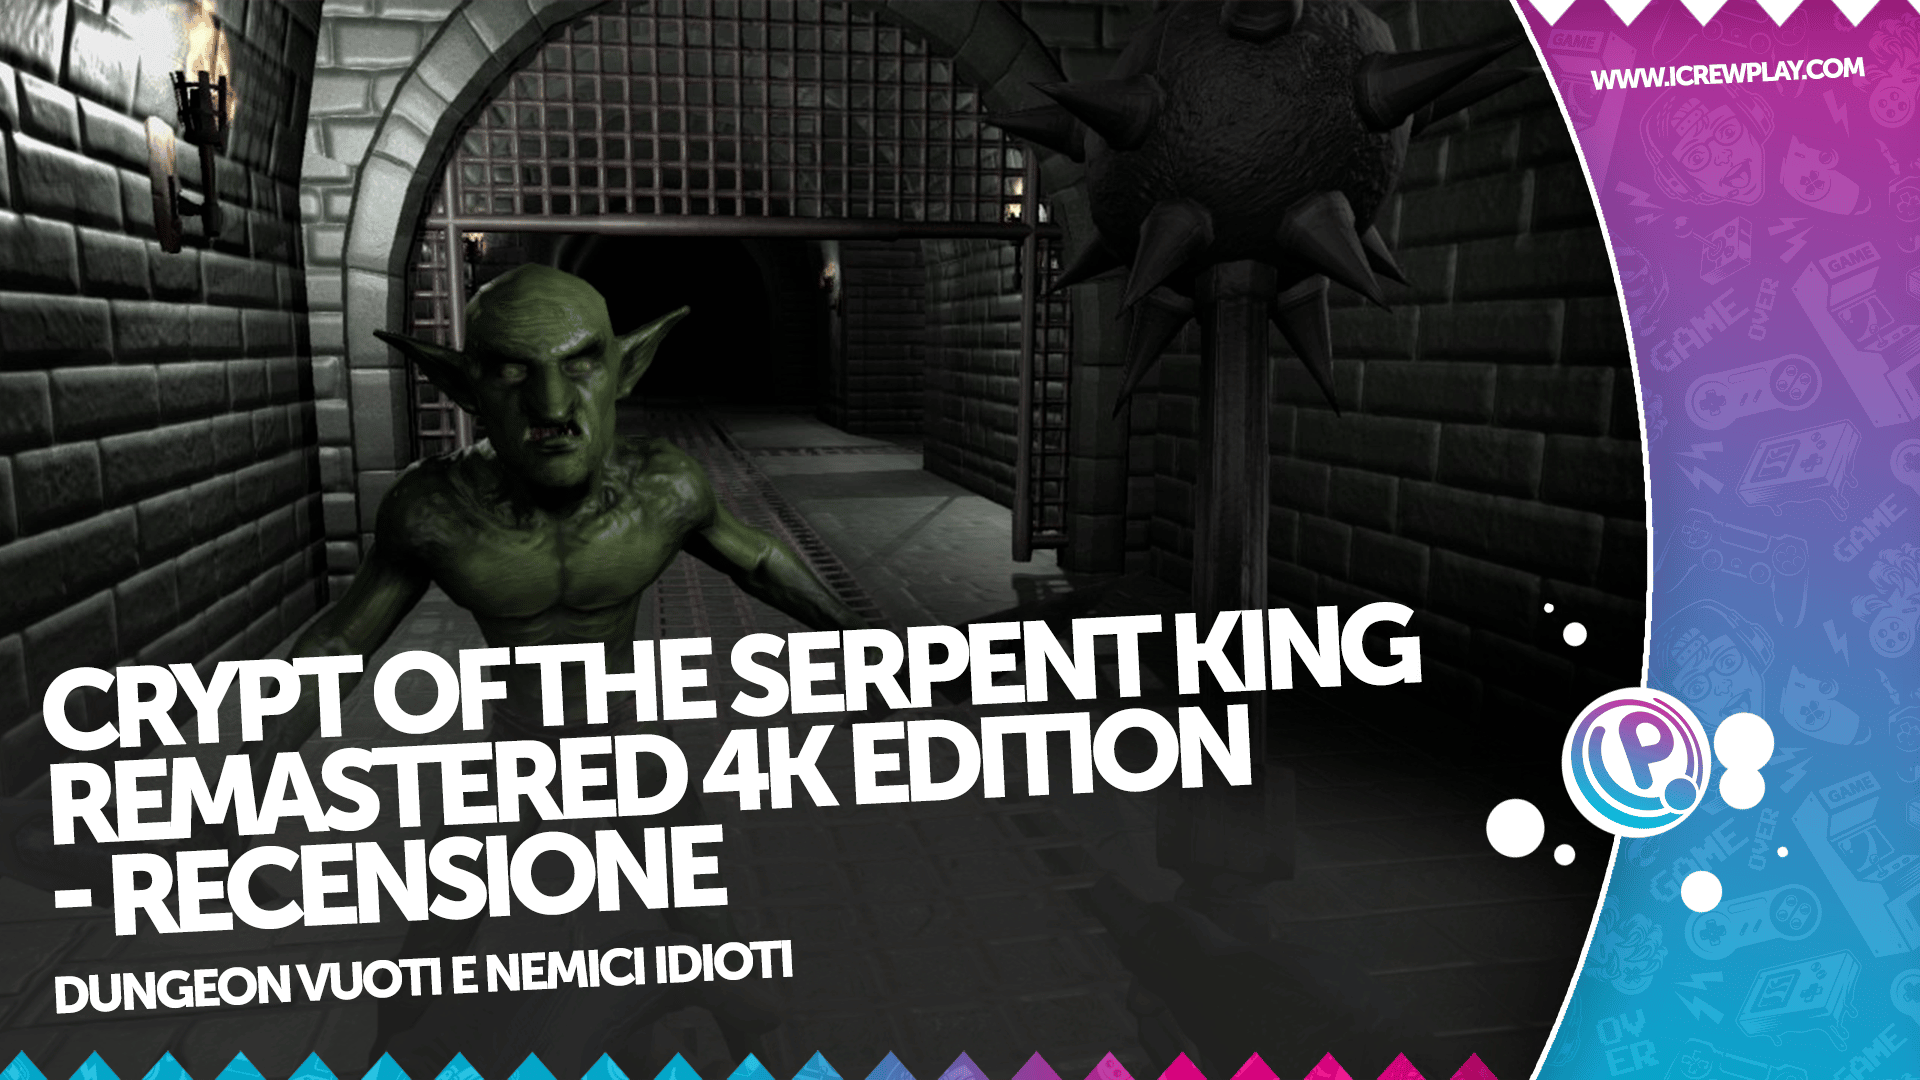 Crypt of the Serpent King Remastered 4K Edition - Recensione per PlayStation 5 28